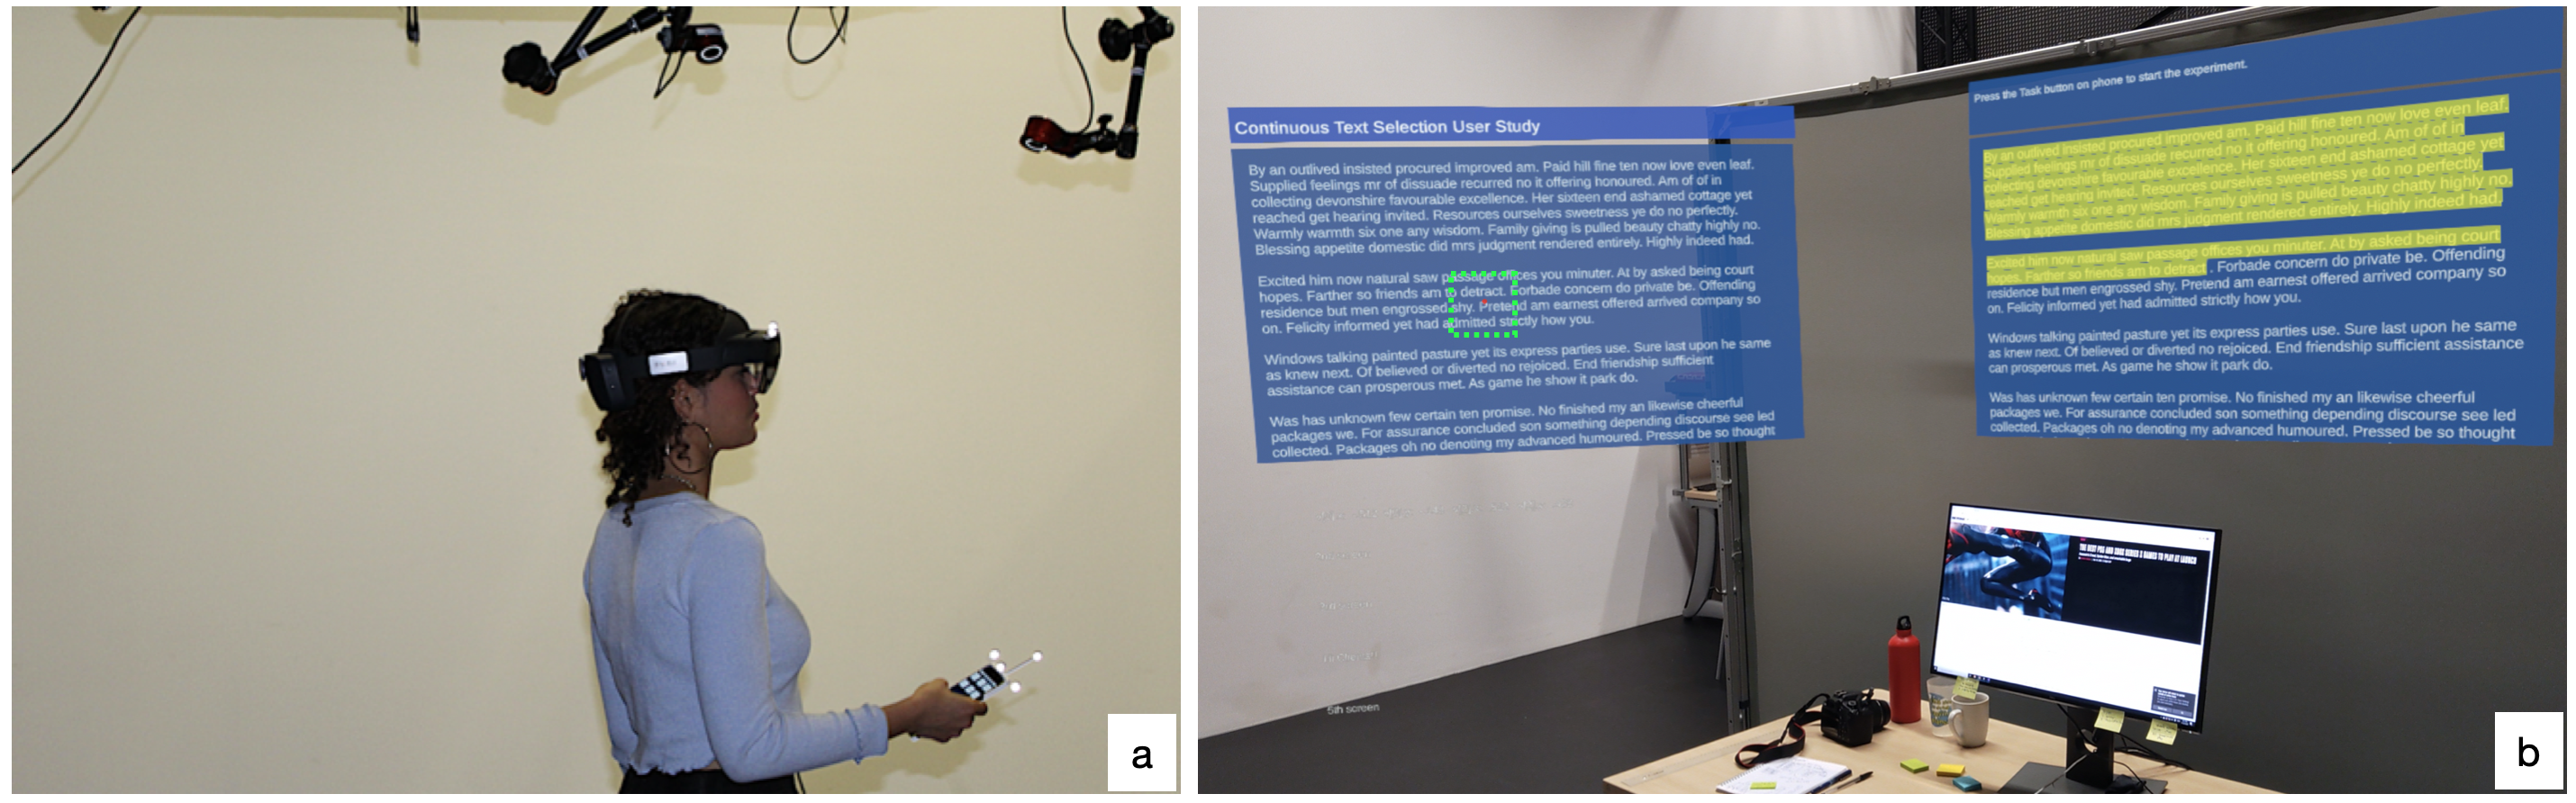 (a) The overall experimental setup consisted of an HoloLens, a smartphone, and an optitrack system. (b) In the HoloLens view, a user sees two text windows. The right one is the `instruction panel' where the subject sees the text to select. The left is the `action panel' where the subject performs the actual selection.